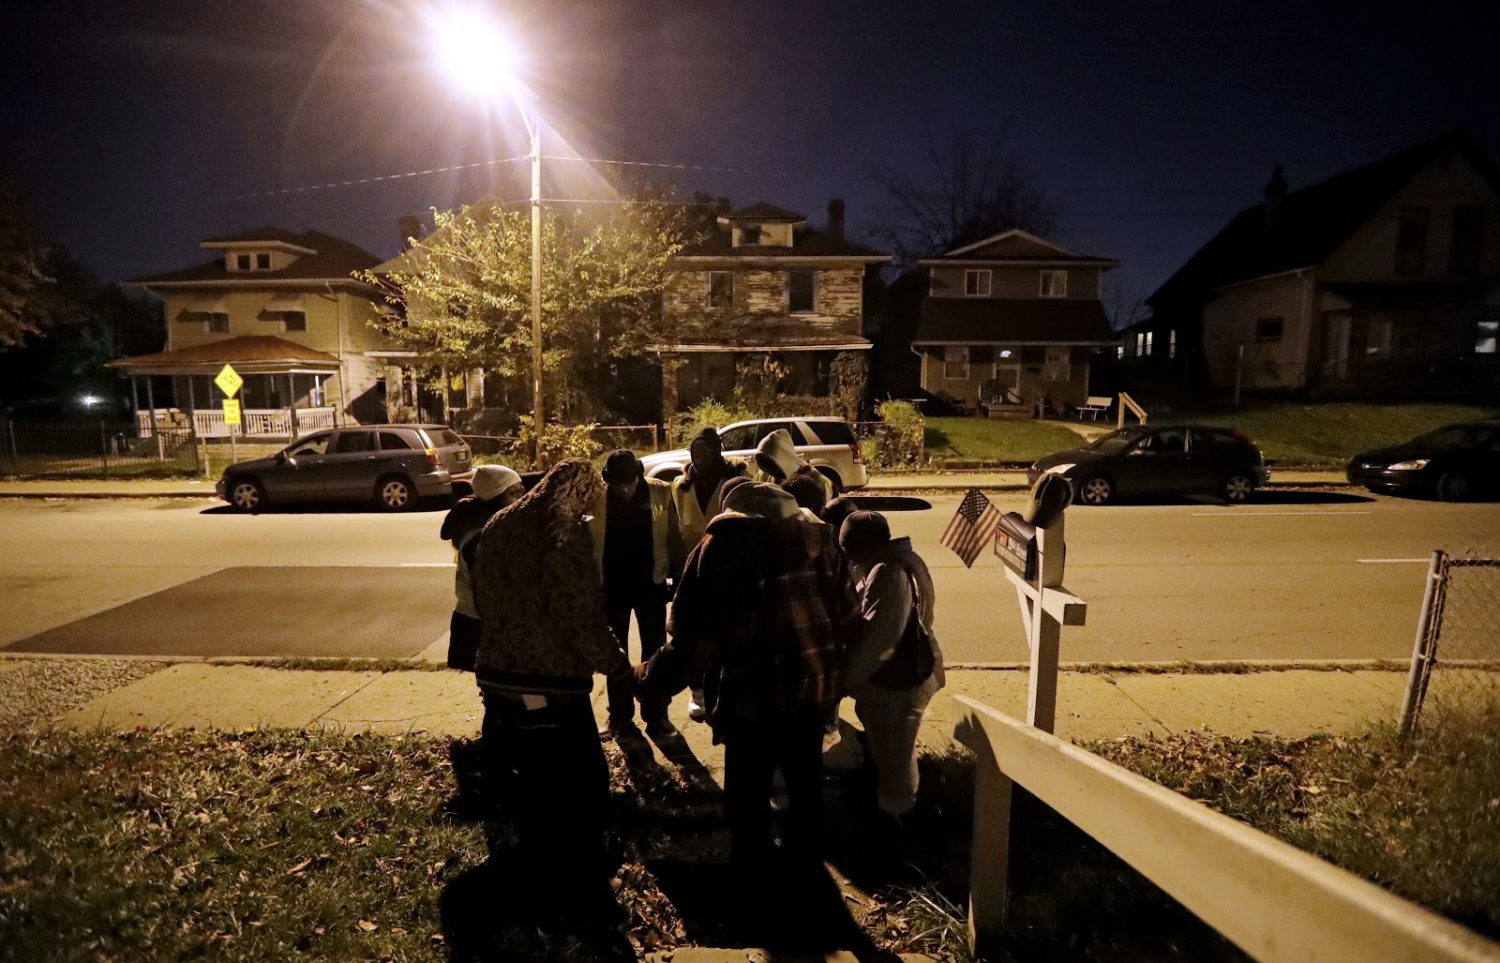 Members of the Ten Point Coalition pray with a family during a walk in 2017 in Indianapolis. Four nights a week, they walk their streets, talking to young people and trying to point them away from trouble. (AP Photo/Darron Cummings)